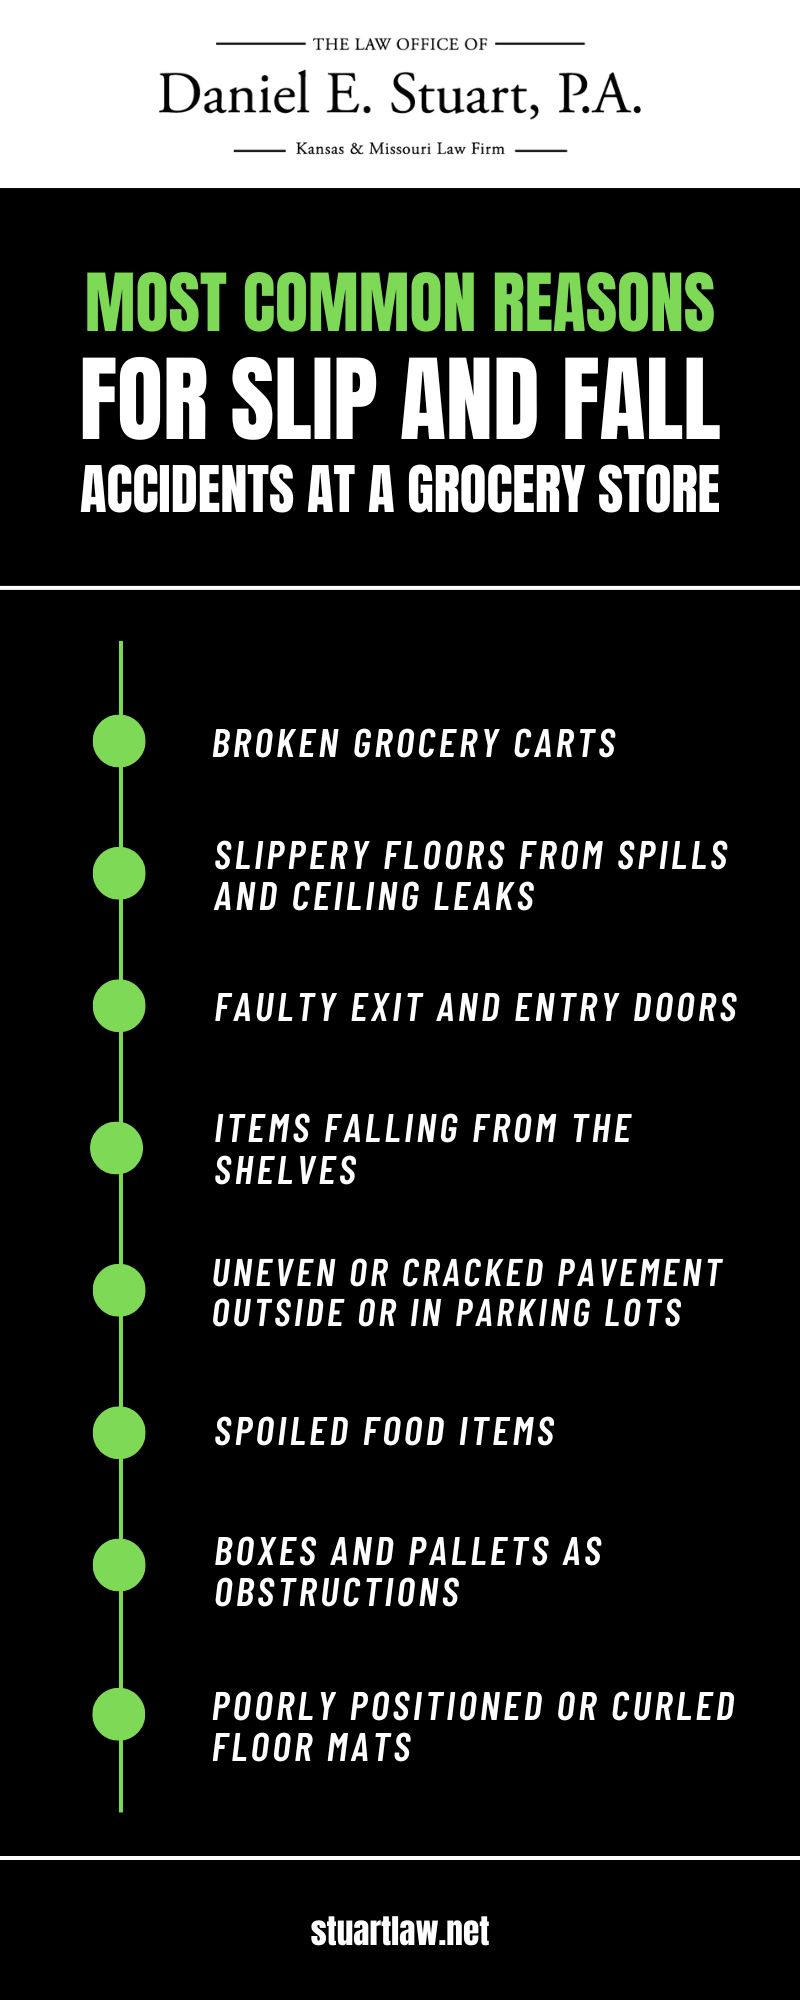 Most Common Reasons For Slip And Fall Accidents At A Grocery Store Infographic 